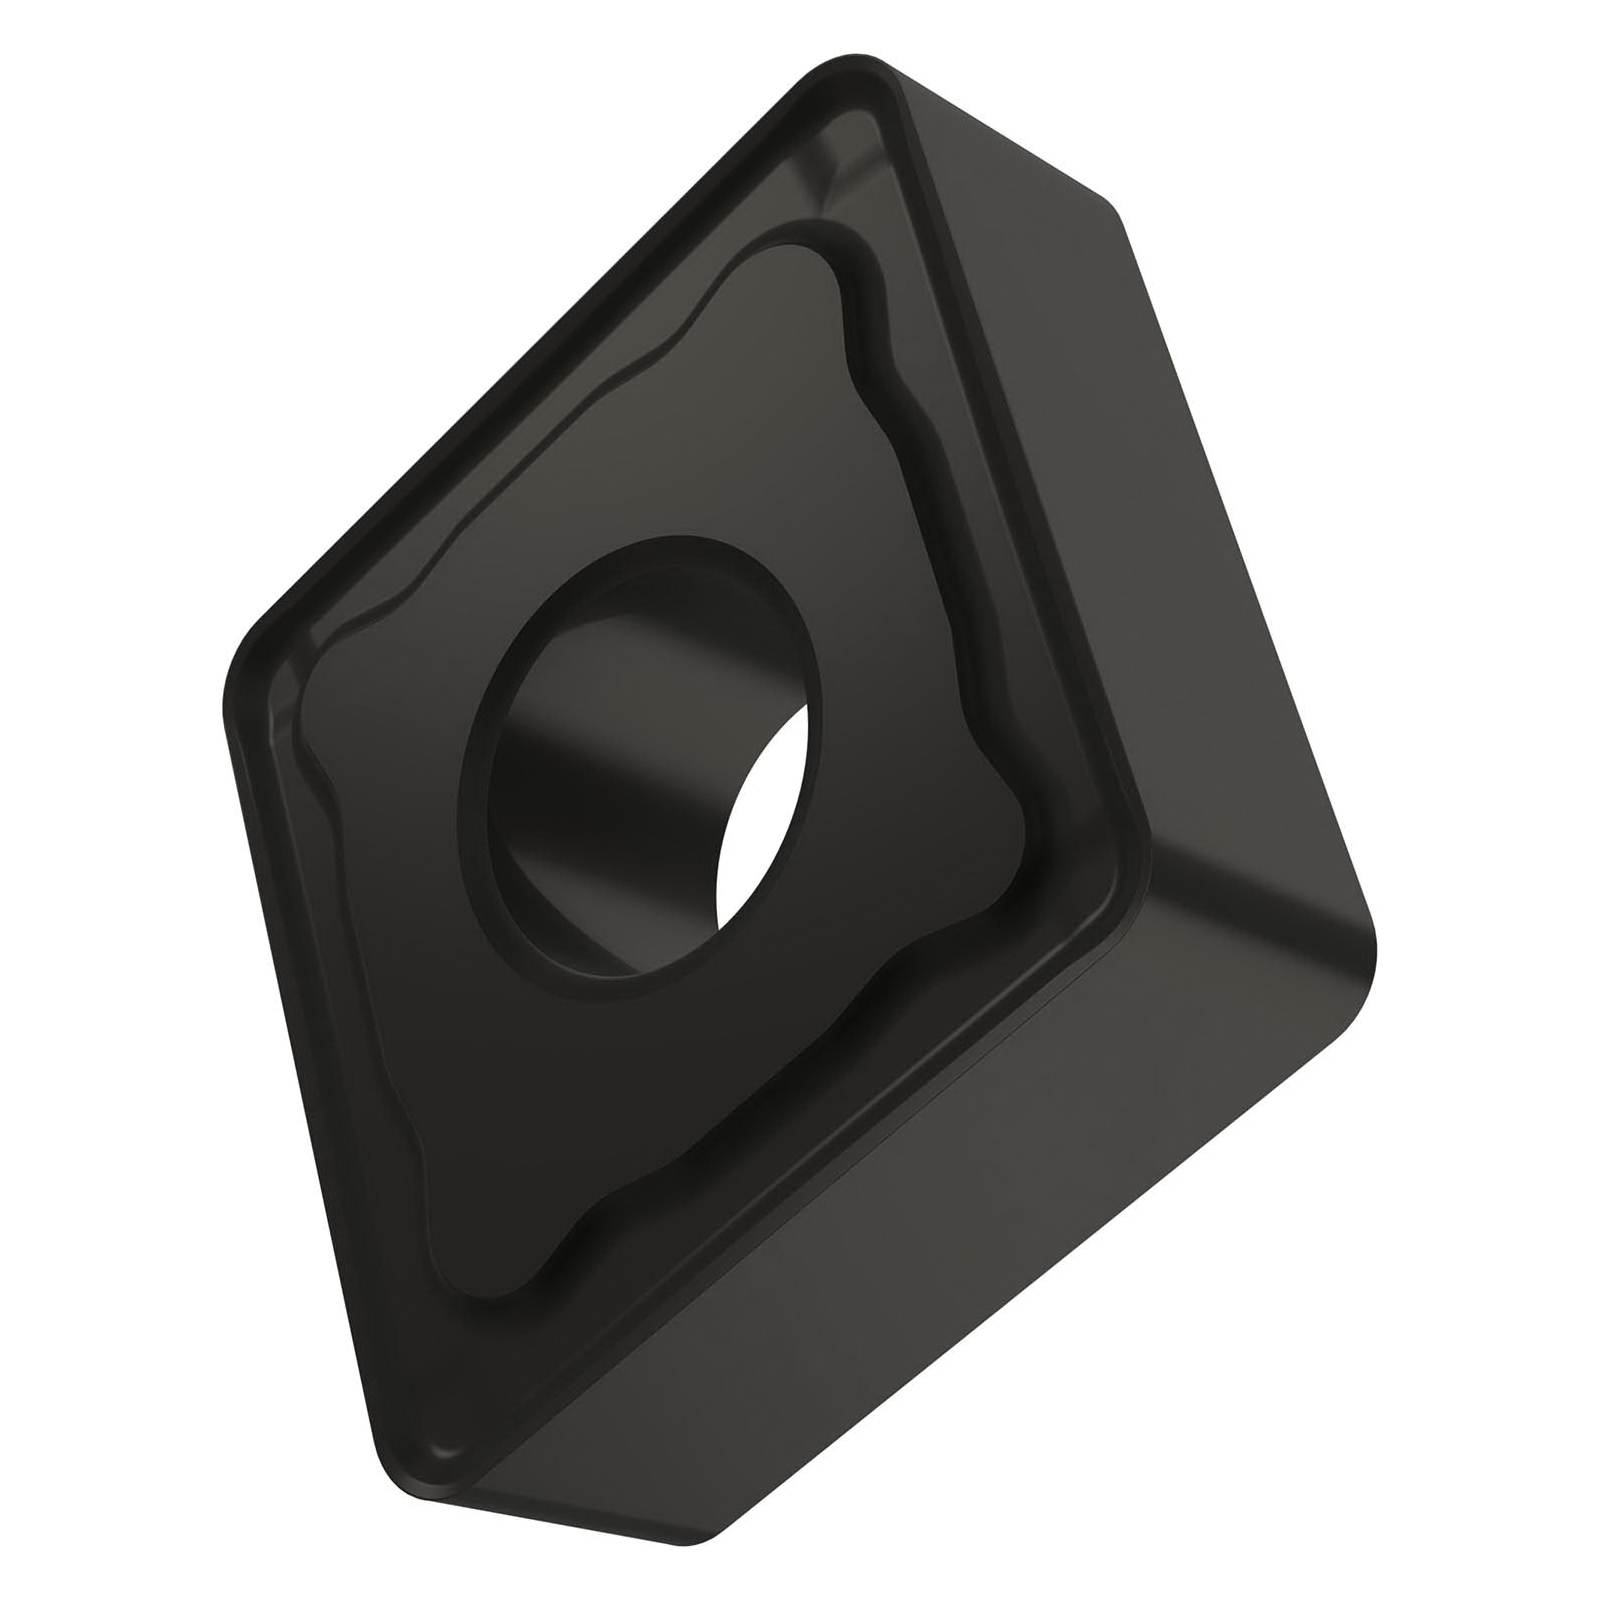 Pramet 6754353 Parting-Off Insert, ANSI Code: LFMX 6.35-.20SNM2:T8330, 6.35-.20 Insert, LFMX Insert, Material Grade: K, M, P, 1/4 in W Cutting, 7 deg Lead Angle, Neutral Lead Angle Direction, 0 deg Relief Angle, Carbide, Manufacturer's Grade: T8330